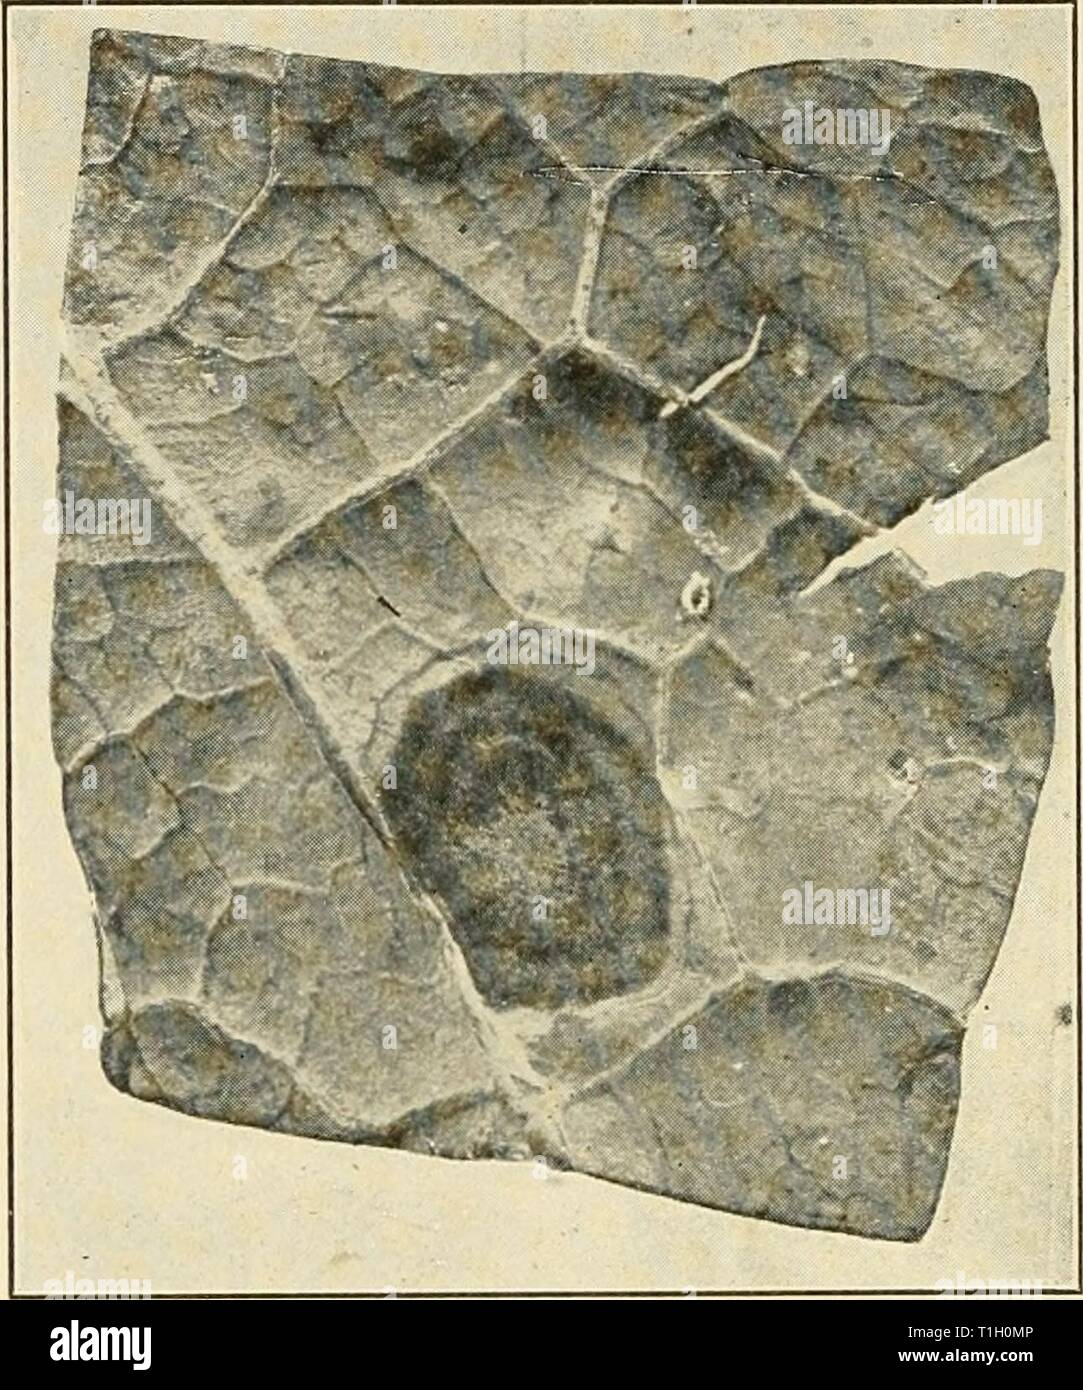 Diseases of economic plants (1910) Diseases of economic plants  diseasesofeconom00stev Year: 1910  230 DISEASES OF ECONOMIC PLANTS Black mold {Alternaria Brassicoe (Berk.) Sacc). â The affected spots are nearly black, marked concentrically, are circular, and are not definitely bordered, i.e., they shade off gradually into the surrounding healthy tissue.    Fig. 108. â CoUard black mold as seen from upper side of the leaf. Original. They enlarge sometimes to 2-3 cm. in diameter. The tissue dries, becomes brittle, and often falls away, leaving ragged holes. The general appearance of the spot as  Stock Photo